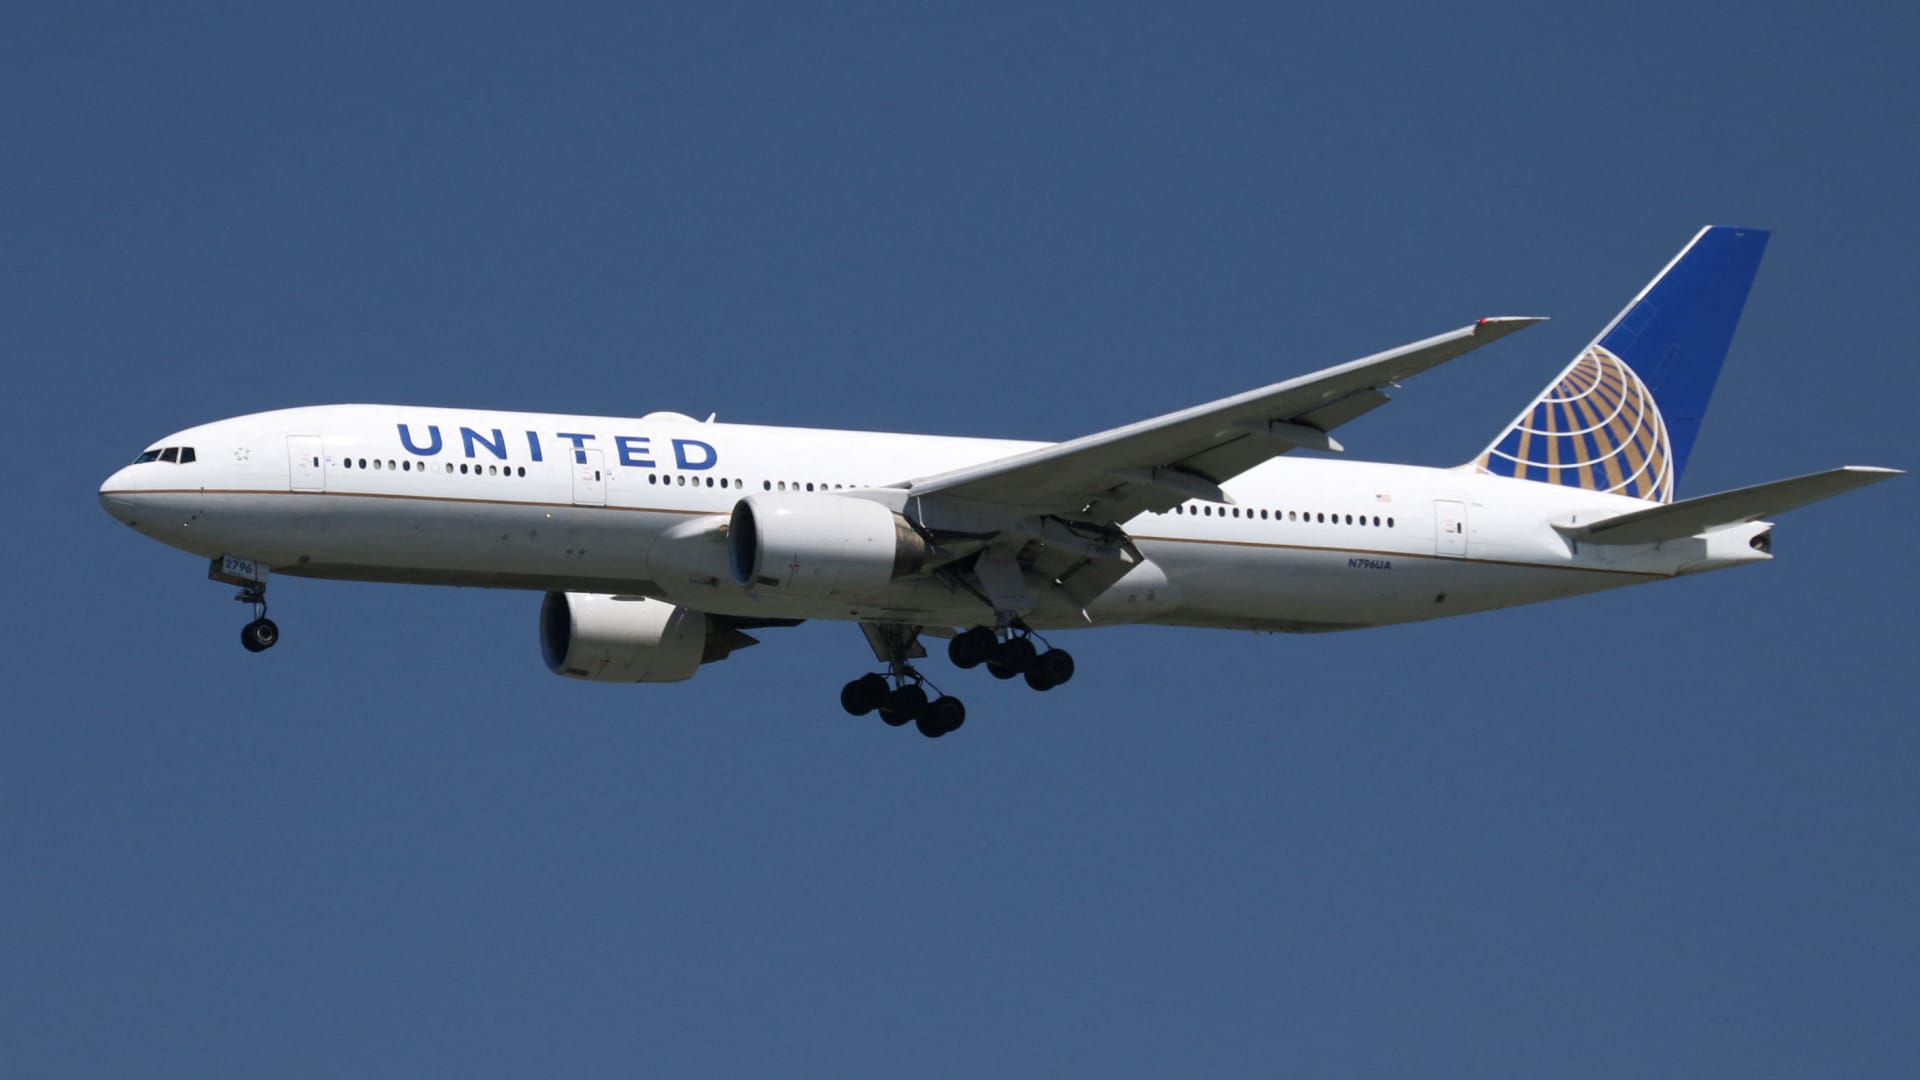 United gives pilots 5% raises early, citing return to profitability